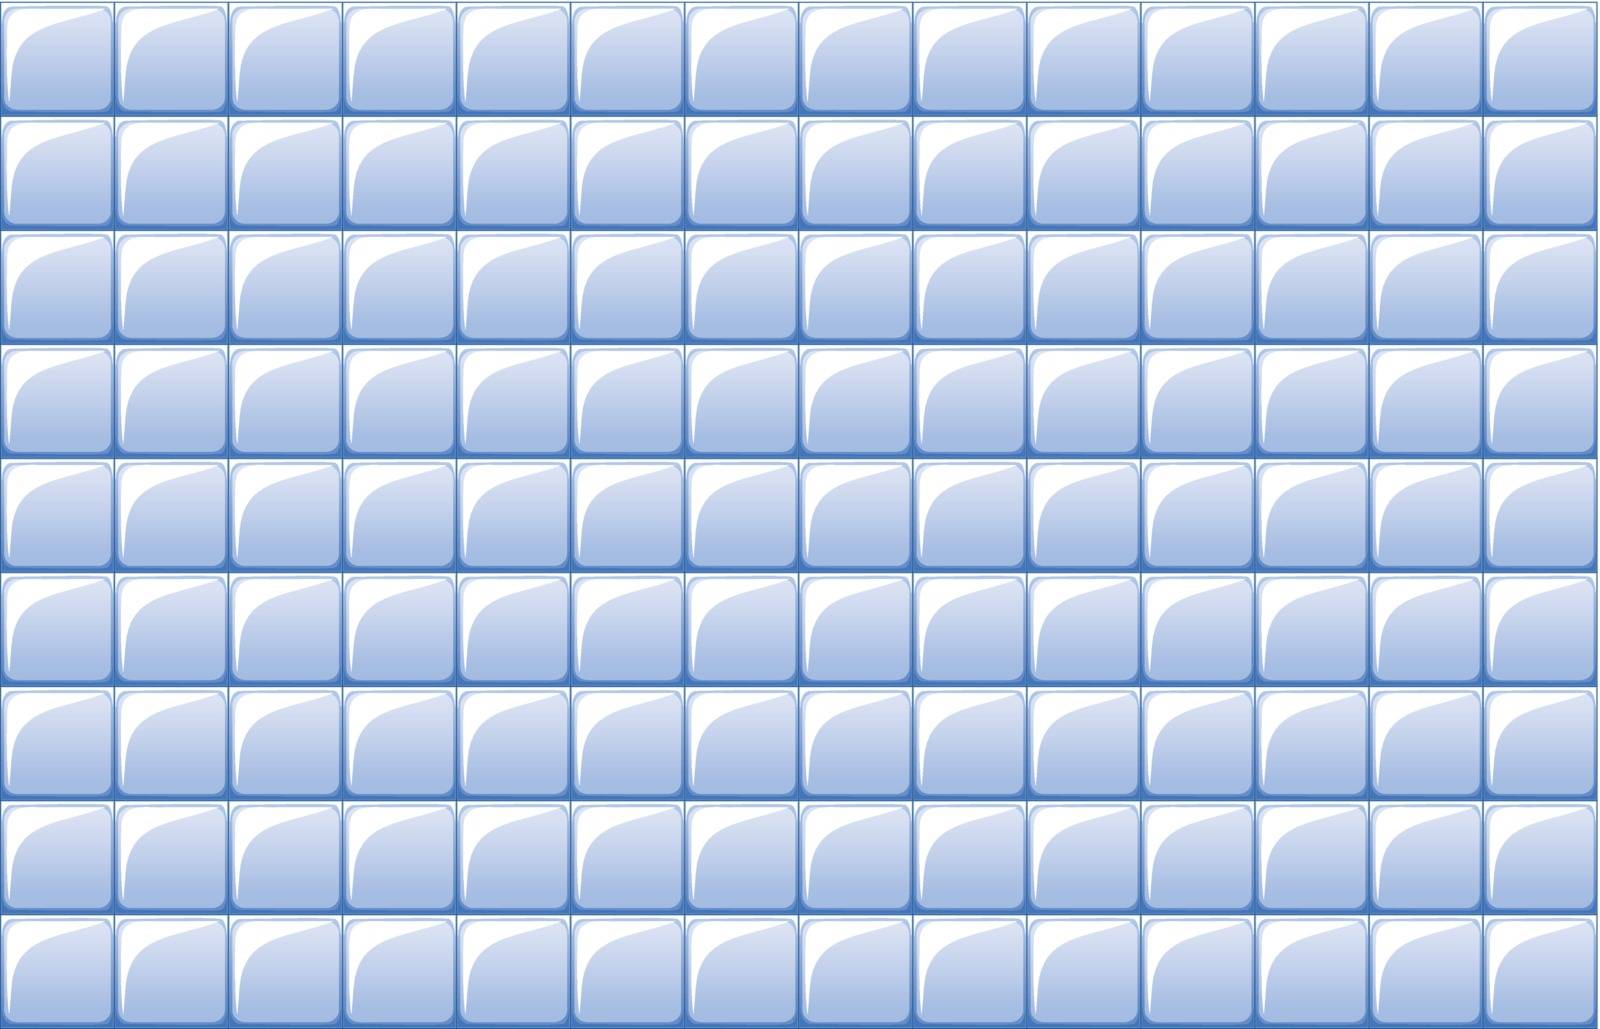 Illustration of a tile texture